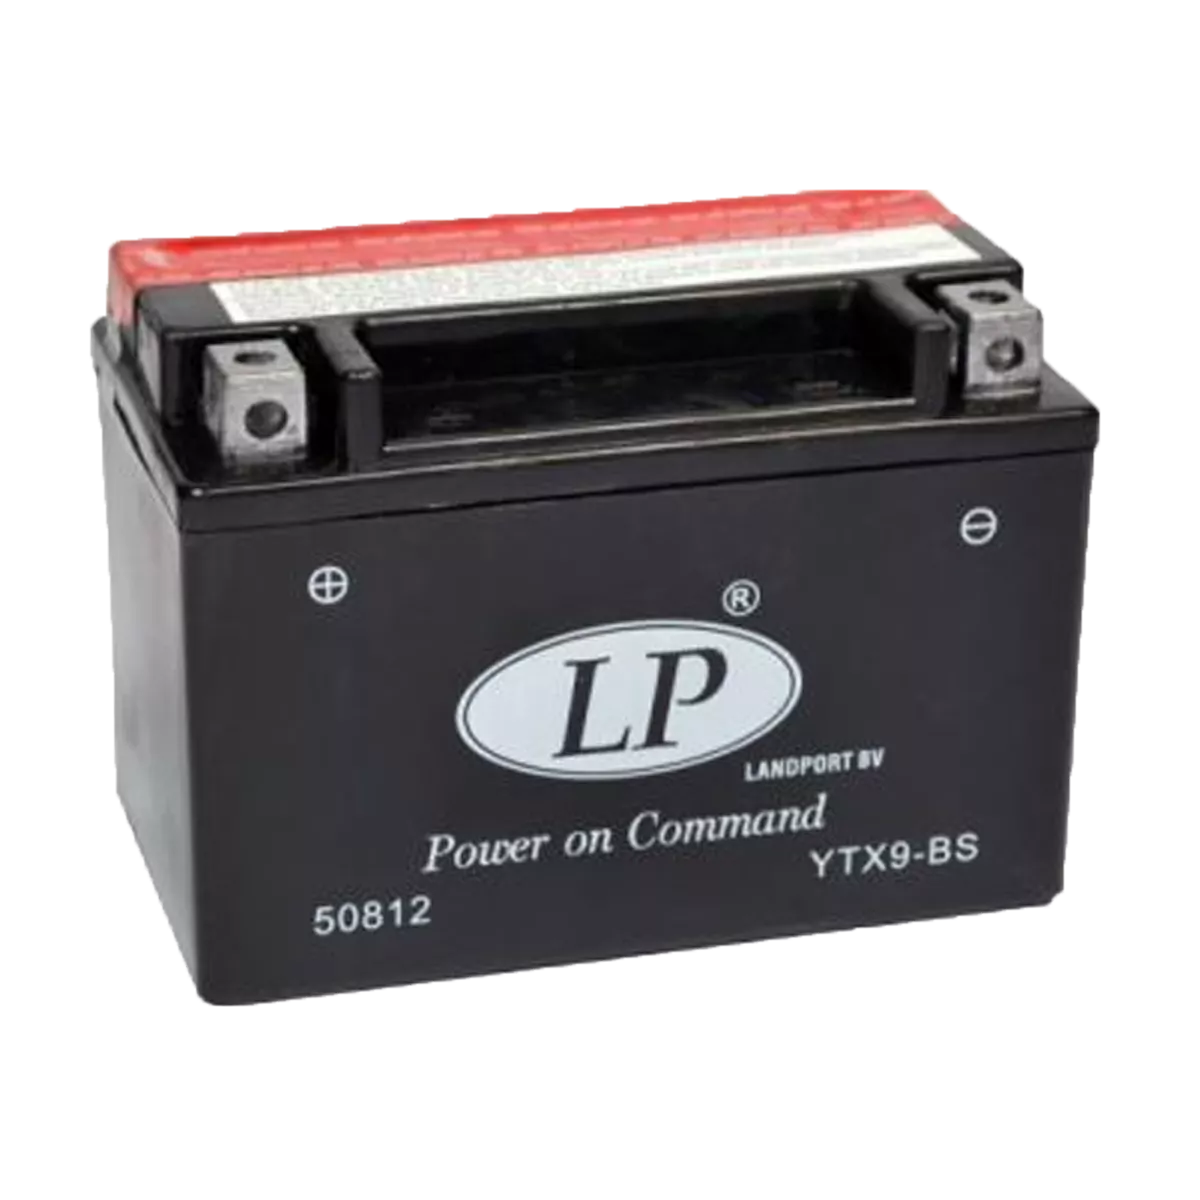 Мотоаккумулятор LP BATTERY AGM 6CT-8Ah Аз 110A (YTX9-BS)